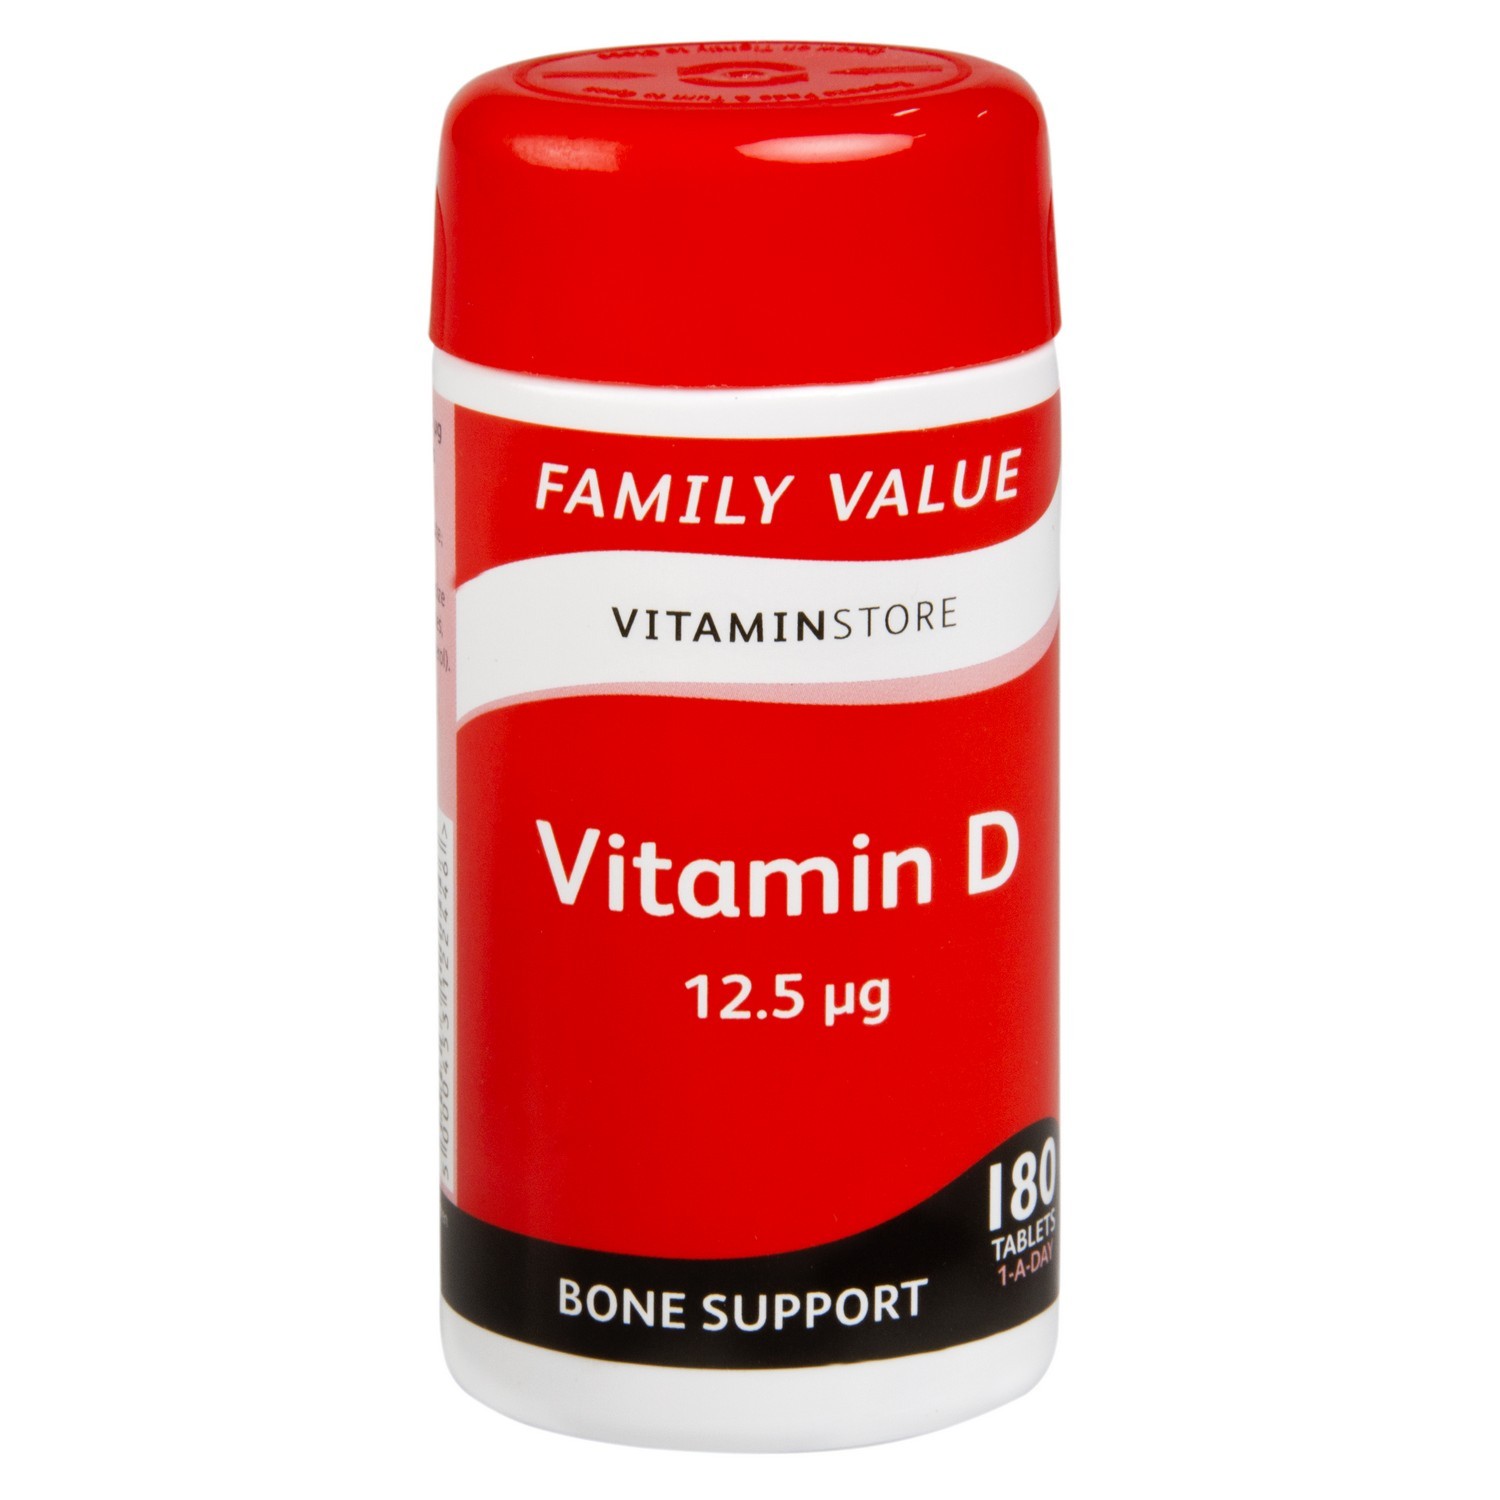 Family Value Vitamin D Tablets Image